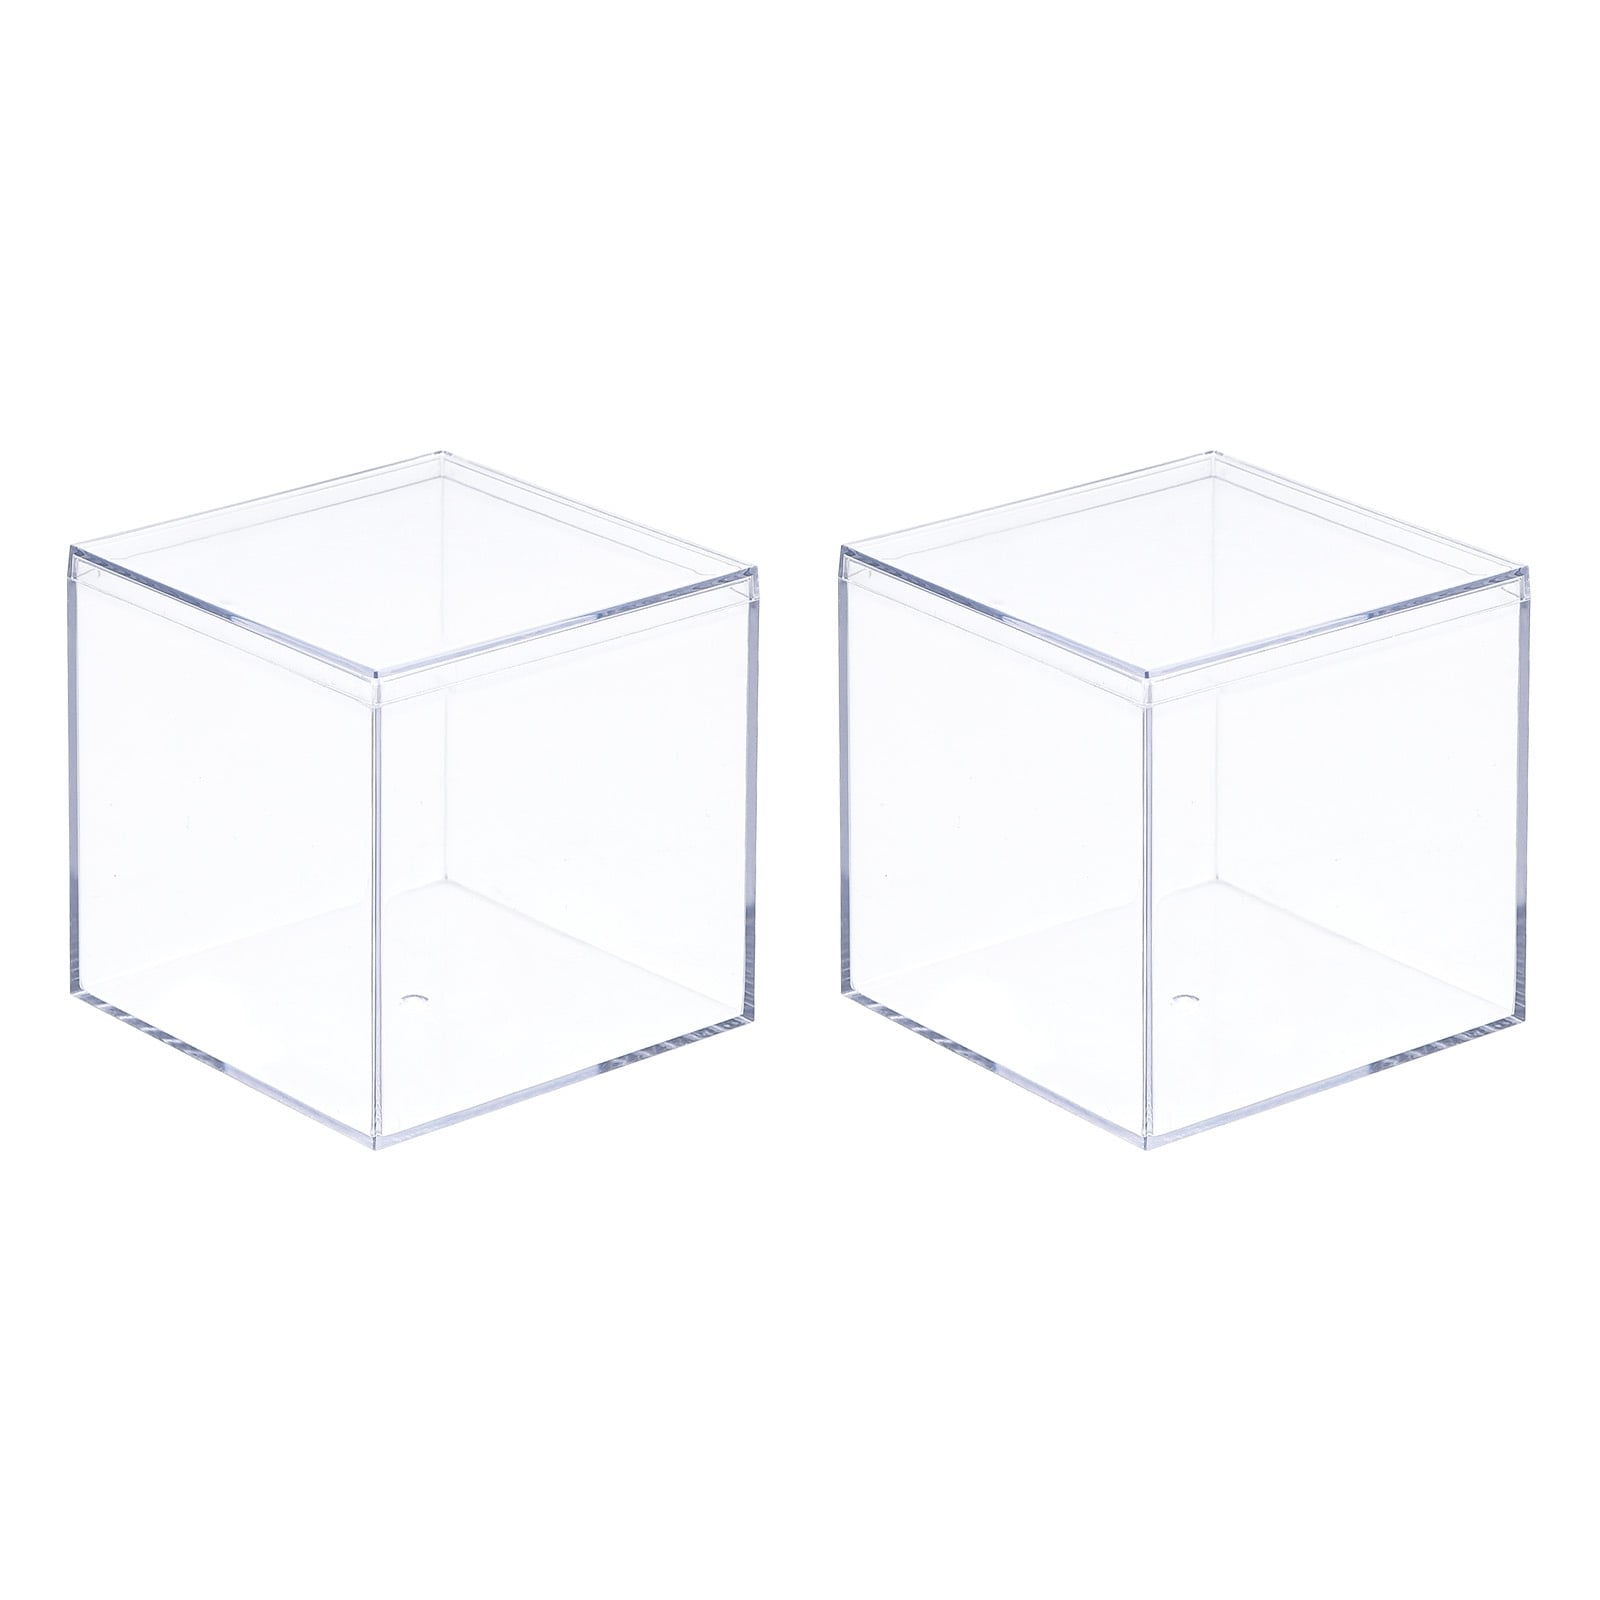 https://ak1.ostkcdn.com/images/products/is/images/direct/ade0fa4ec746550efb0ee94686422b60ec2d56c5/Acrylic-Storage-Box-Square-Cube-Display-Case-with-Lid%2C-Container-Box.jpg